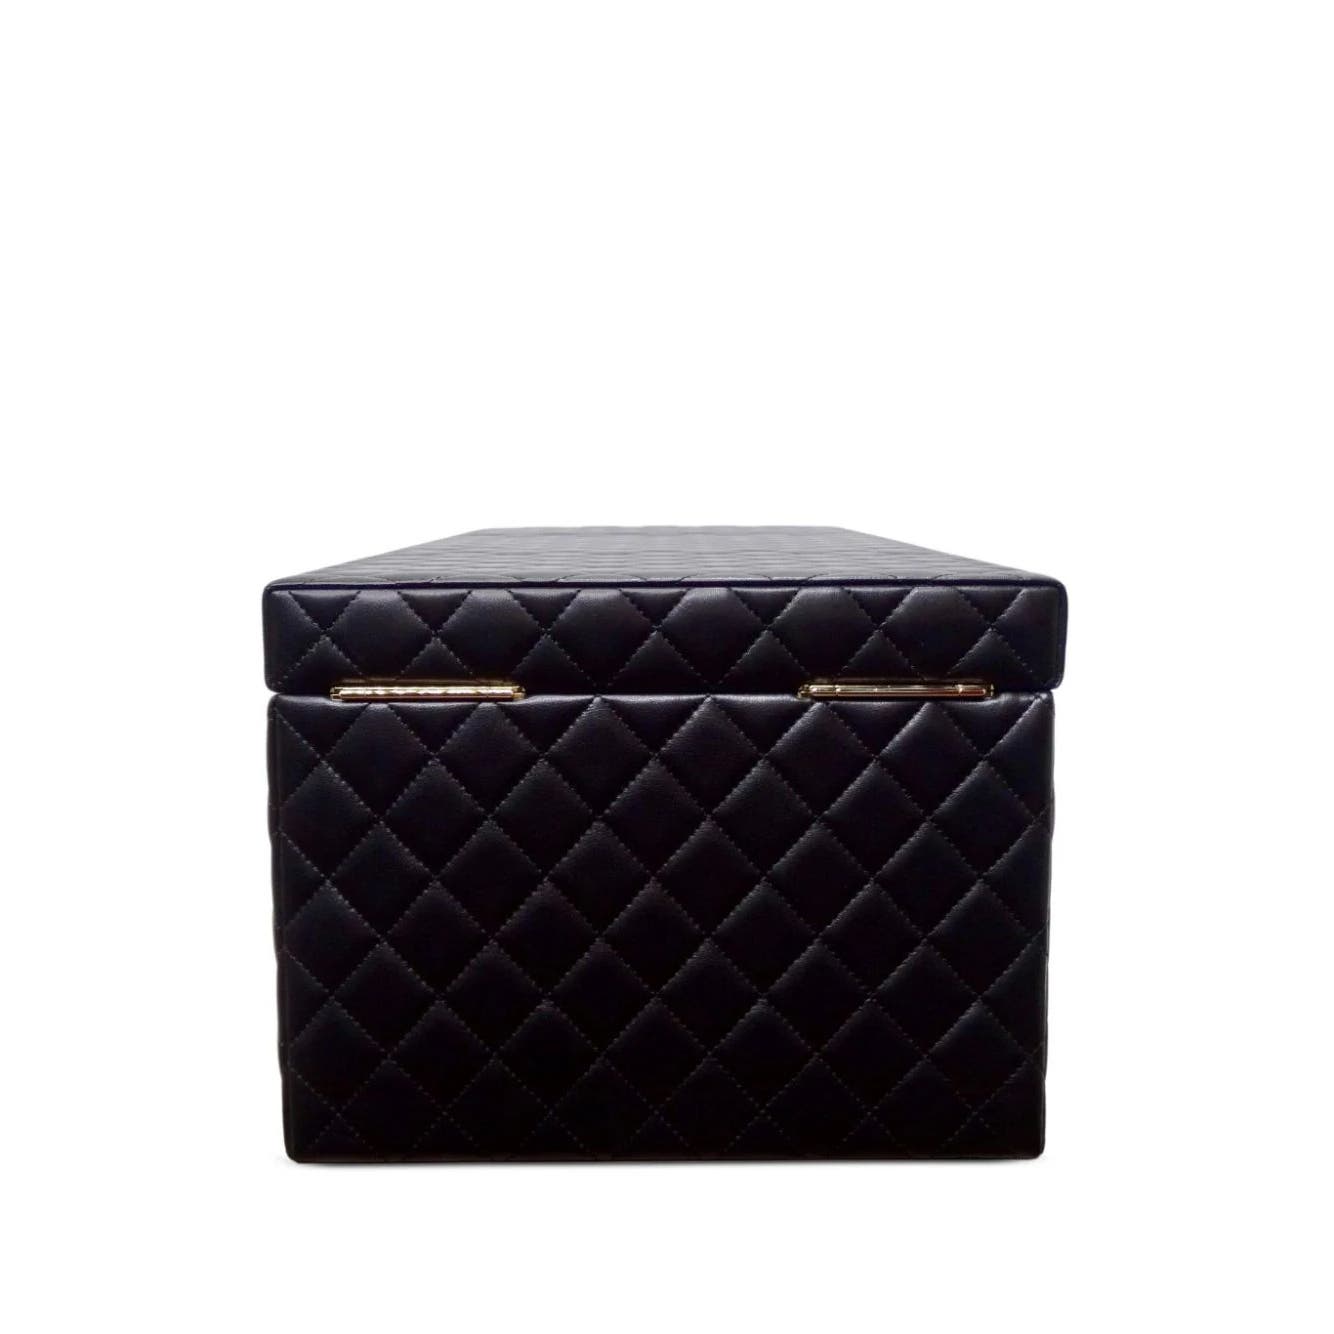 Chanel Diamond Quilted Lambskin Giant Jewelry Decor Case